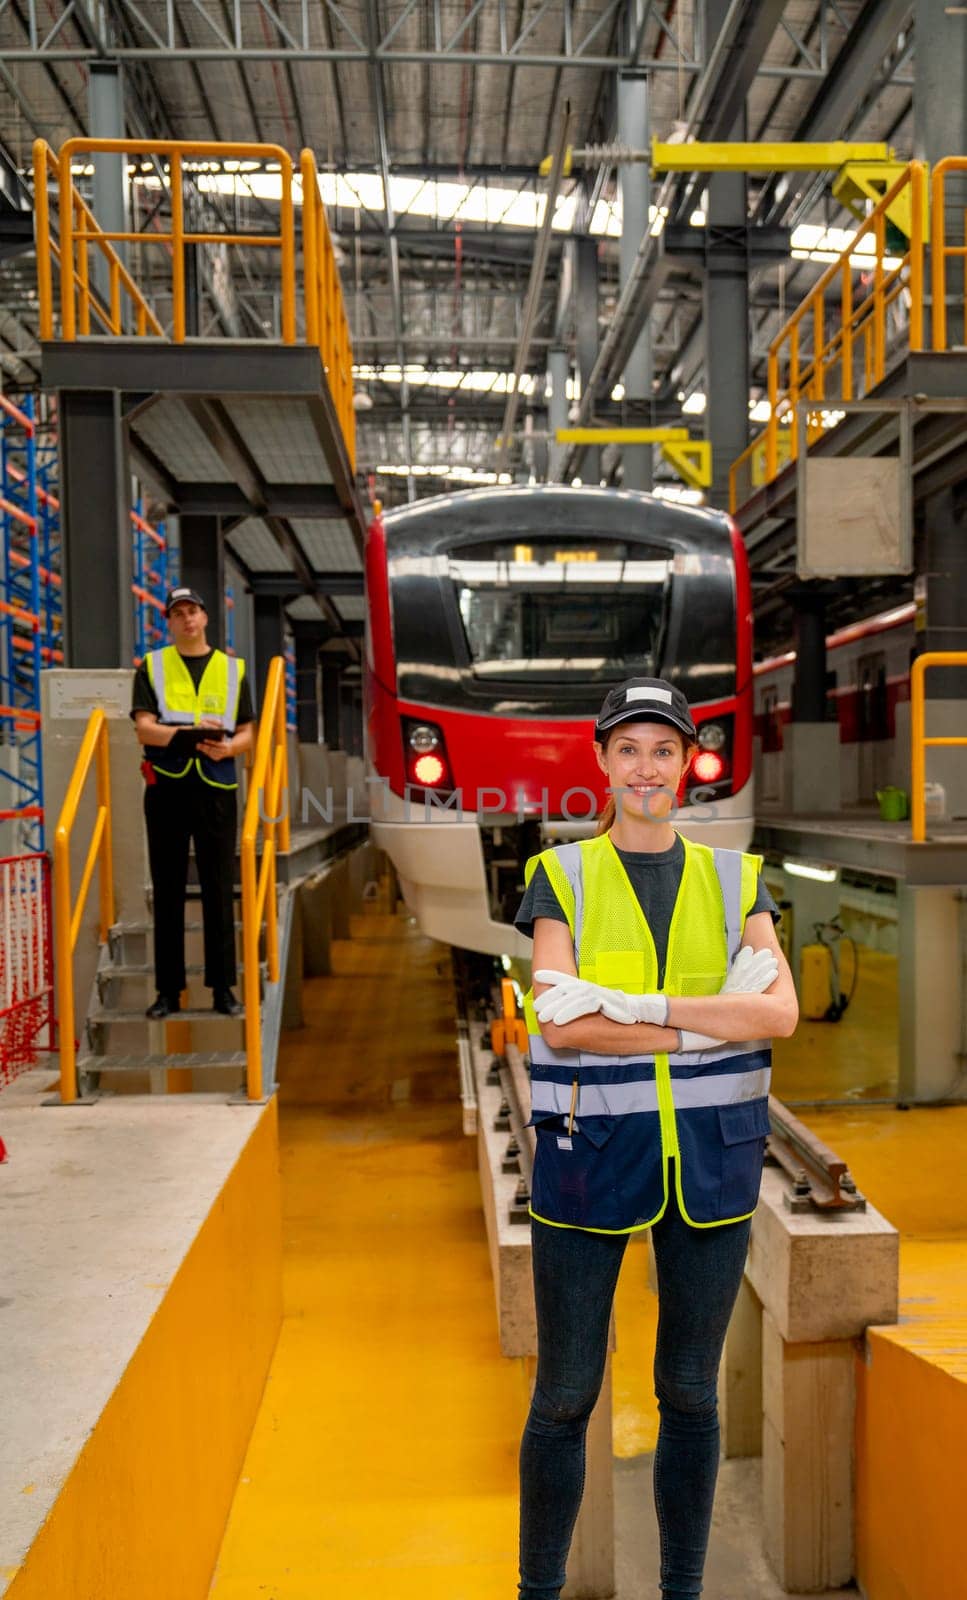 Vertical image of professional engineer or technician worker woman stand with arm-crossed in front of co-worker and electric train in workplace area of maintenance center.